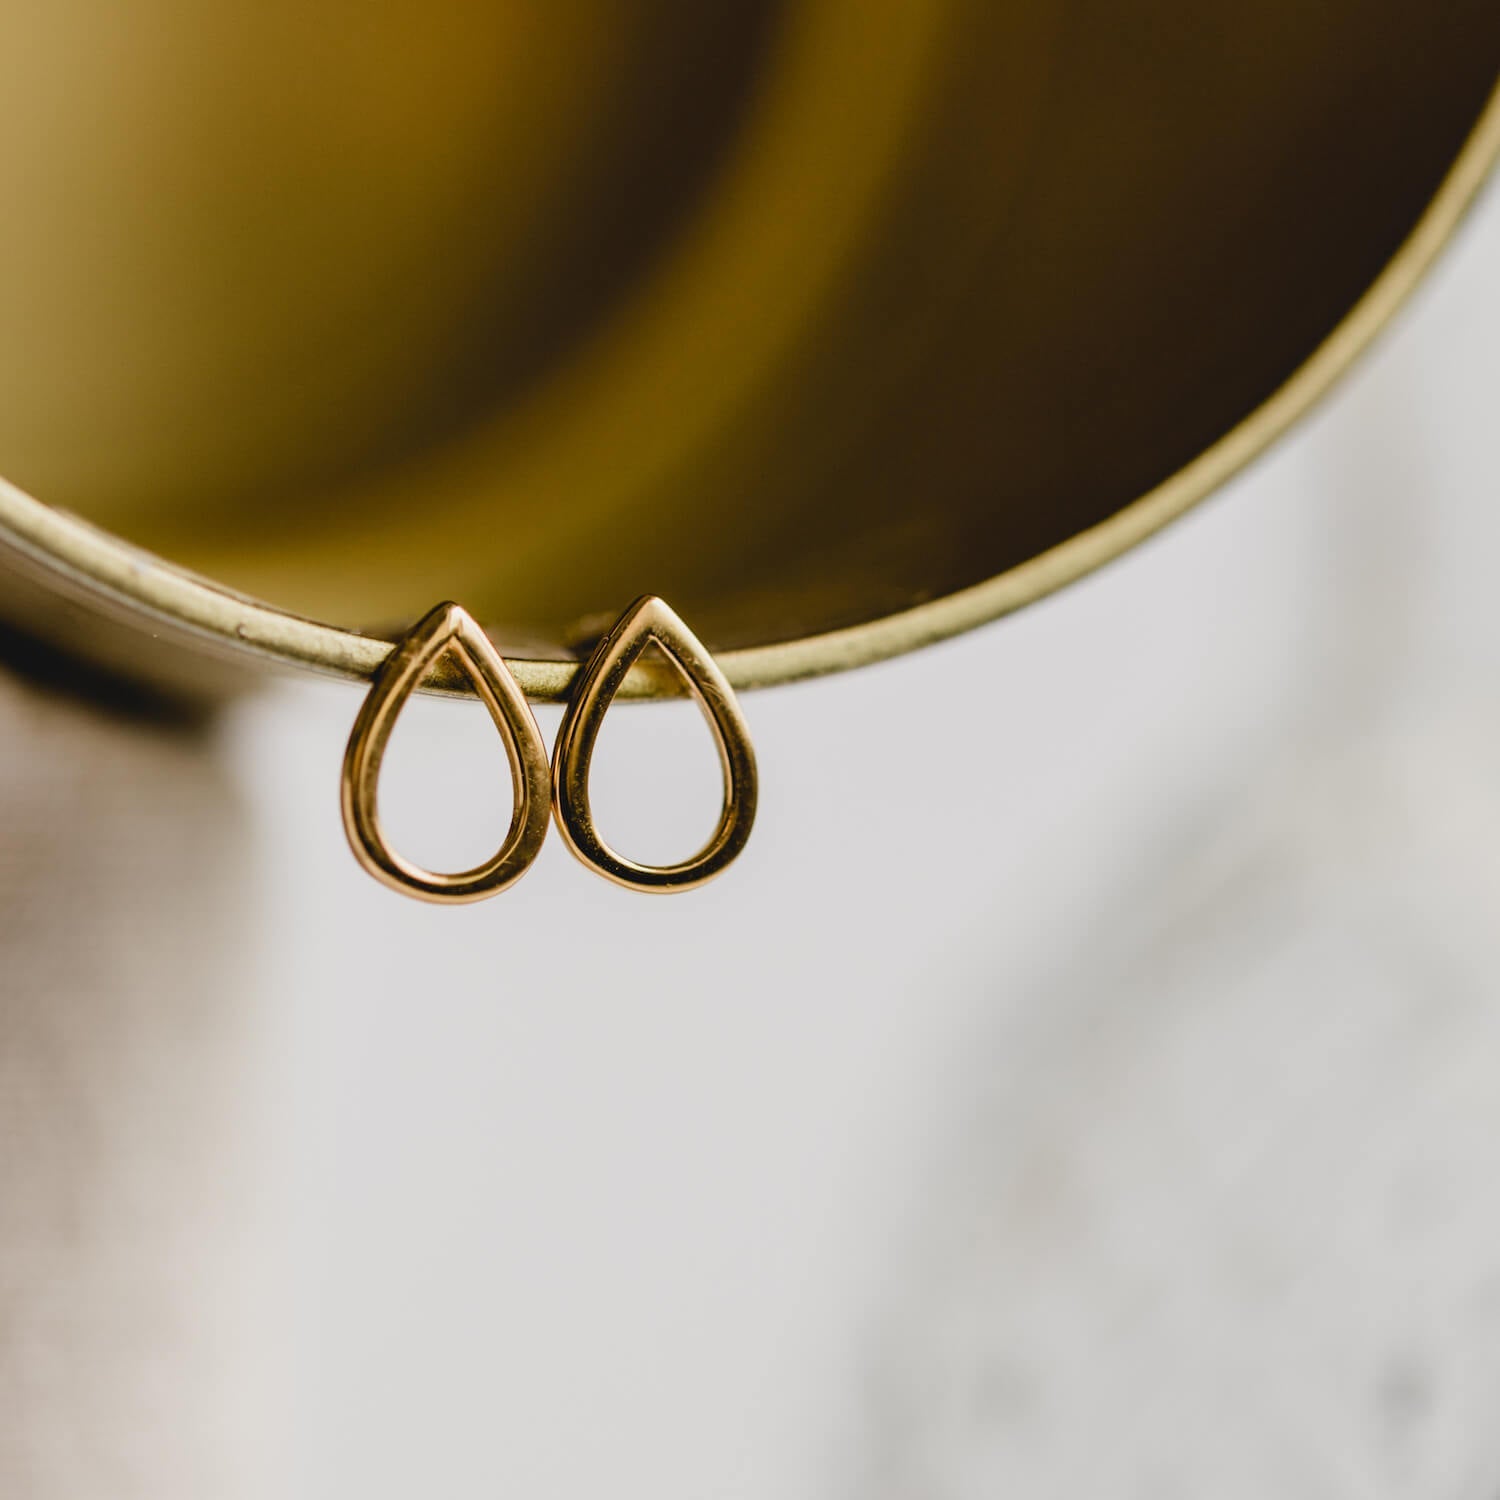 Close up of gold teardrop shaped earrings hung on a gold tube